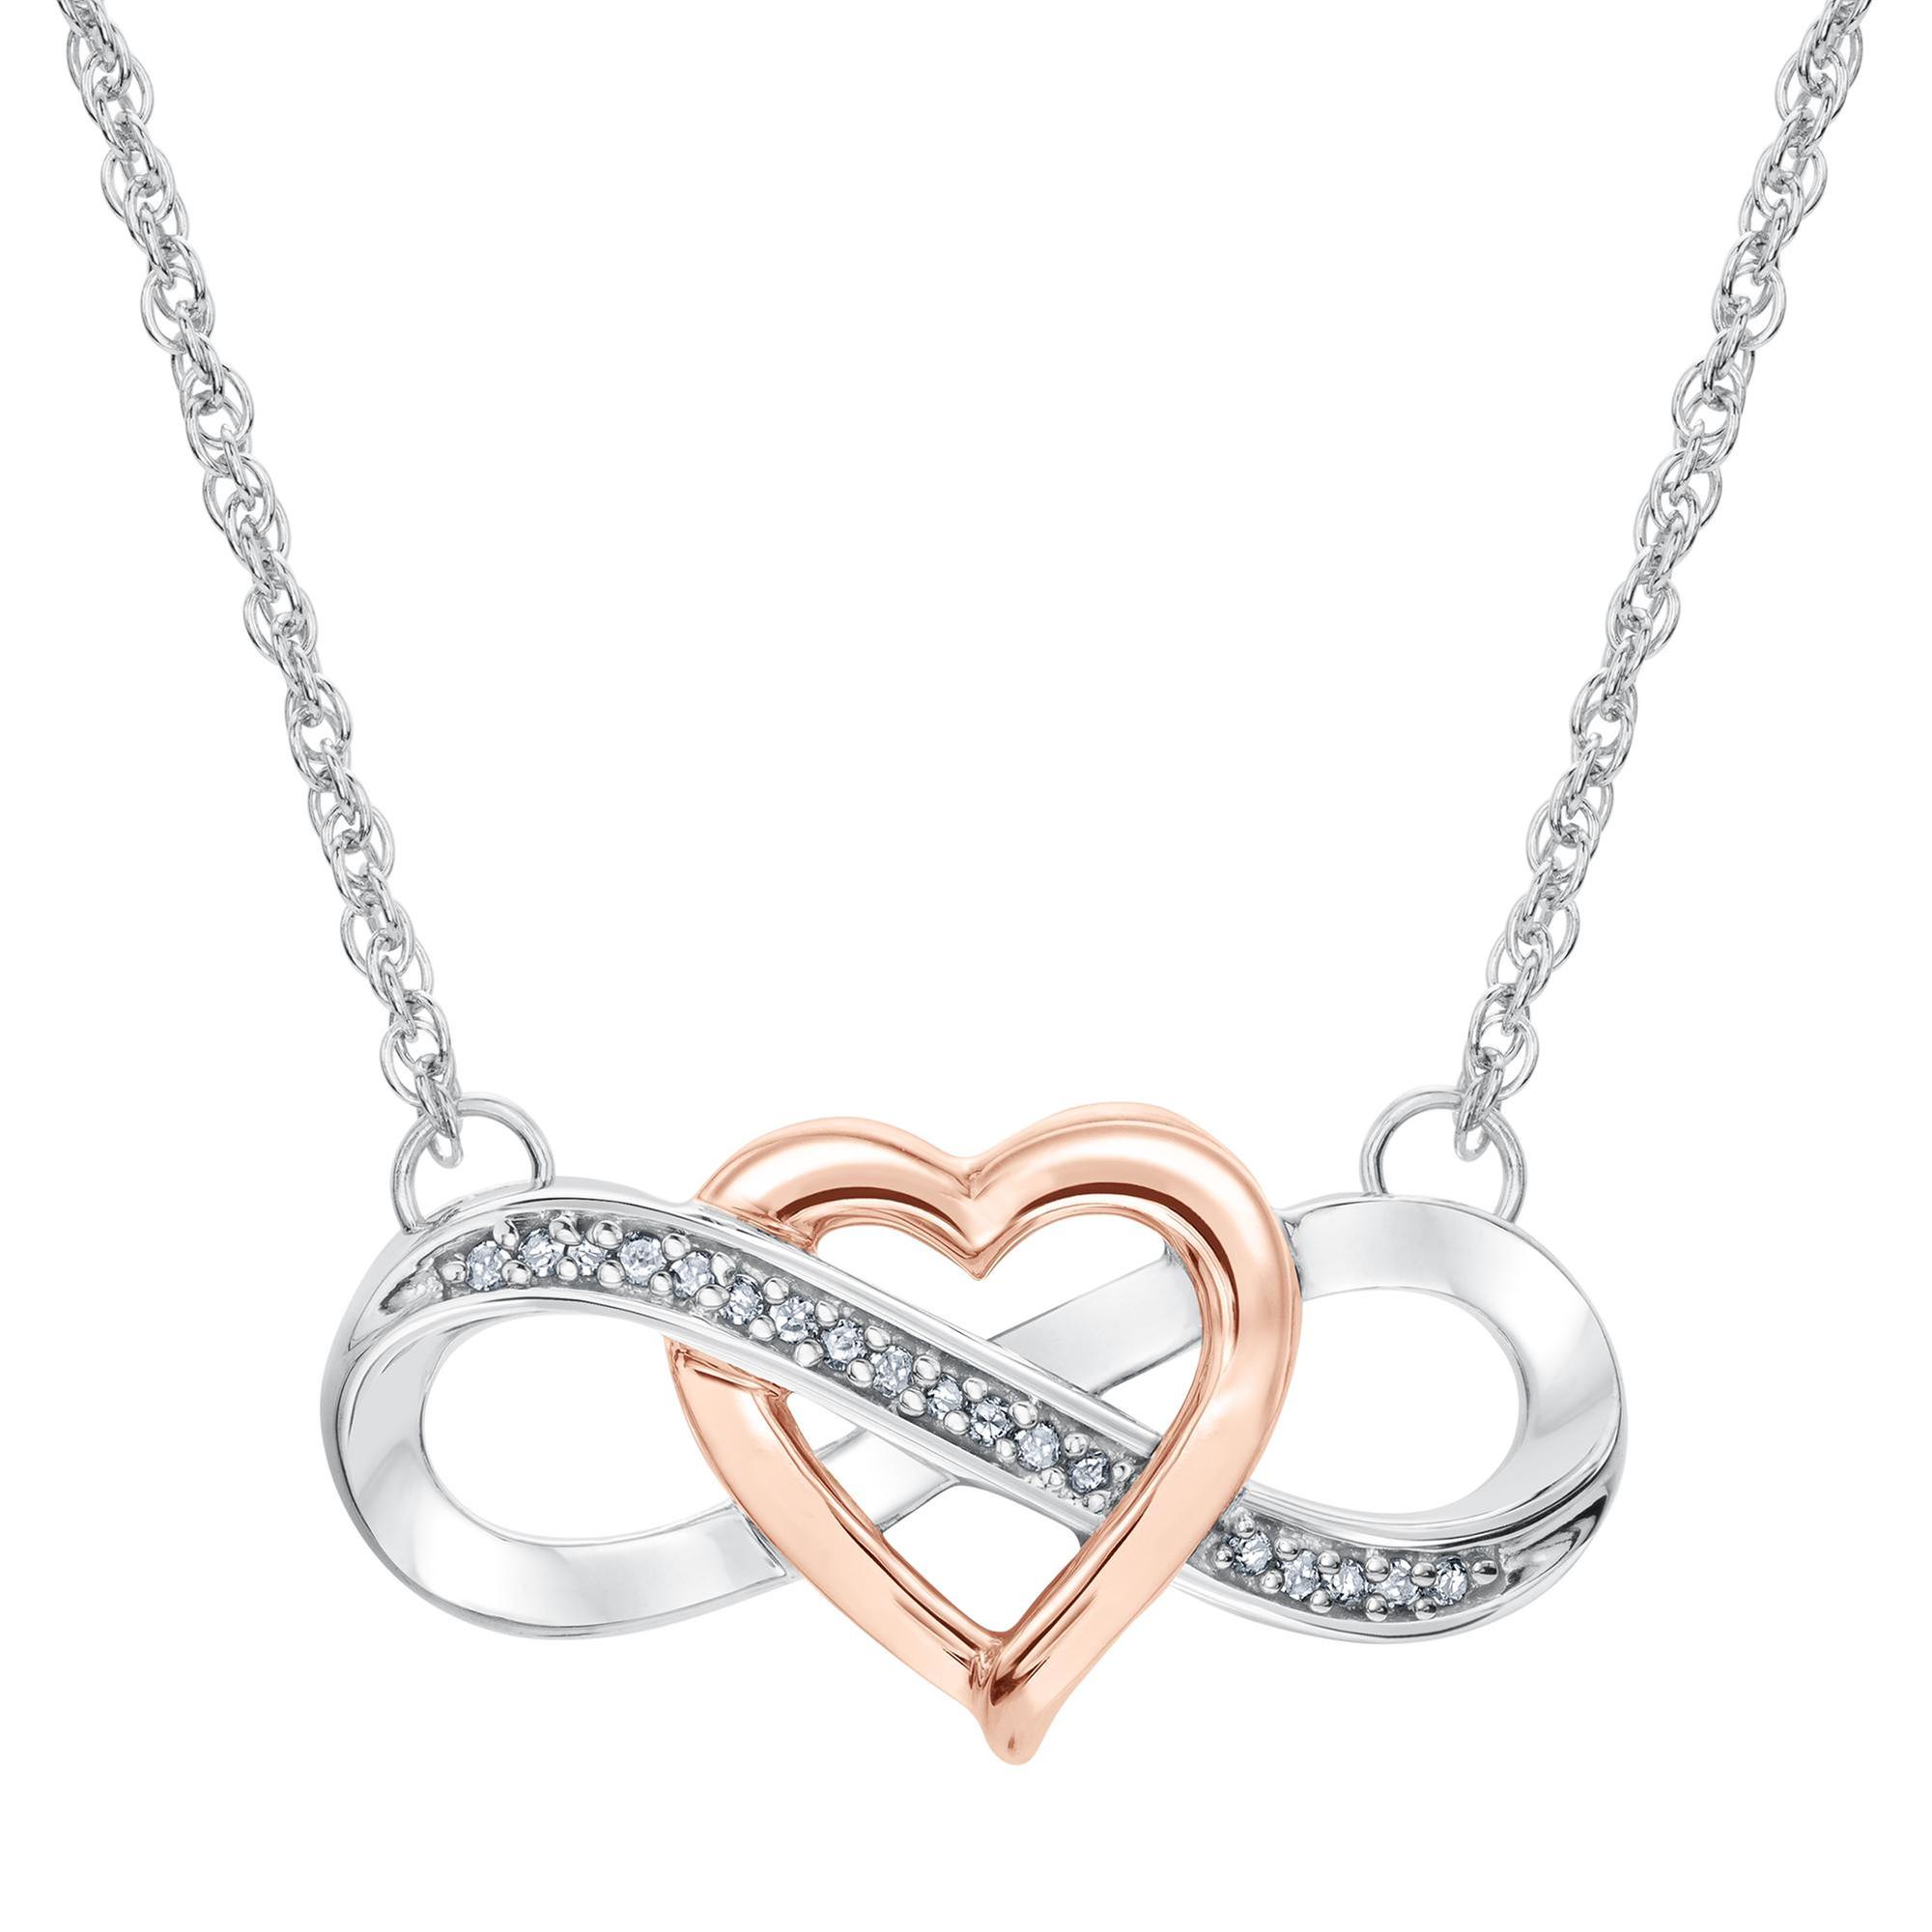 CLYQCL Love Heart Locket Necklace That Holds Pictures Engraved I Love You to Infthity and Beyond